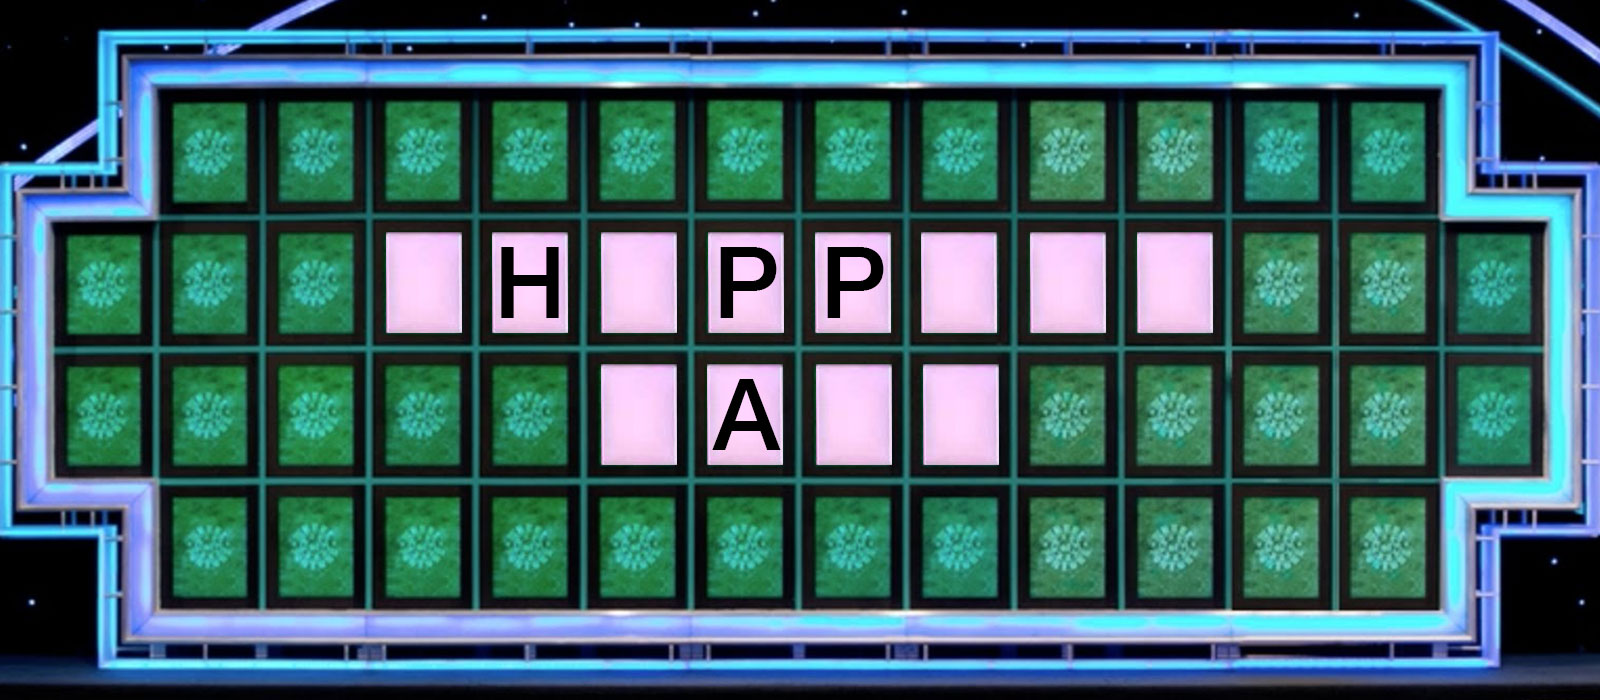 Can You Solve These Wheel of Fortune Puzzles? Quiz 418